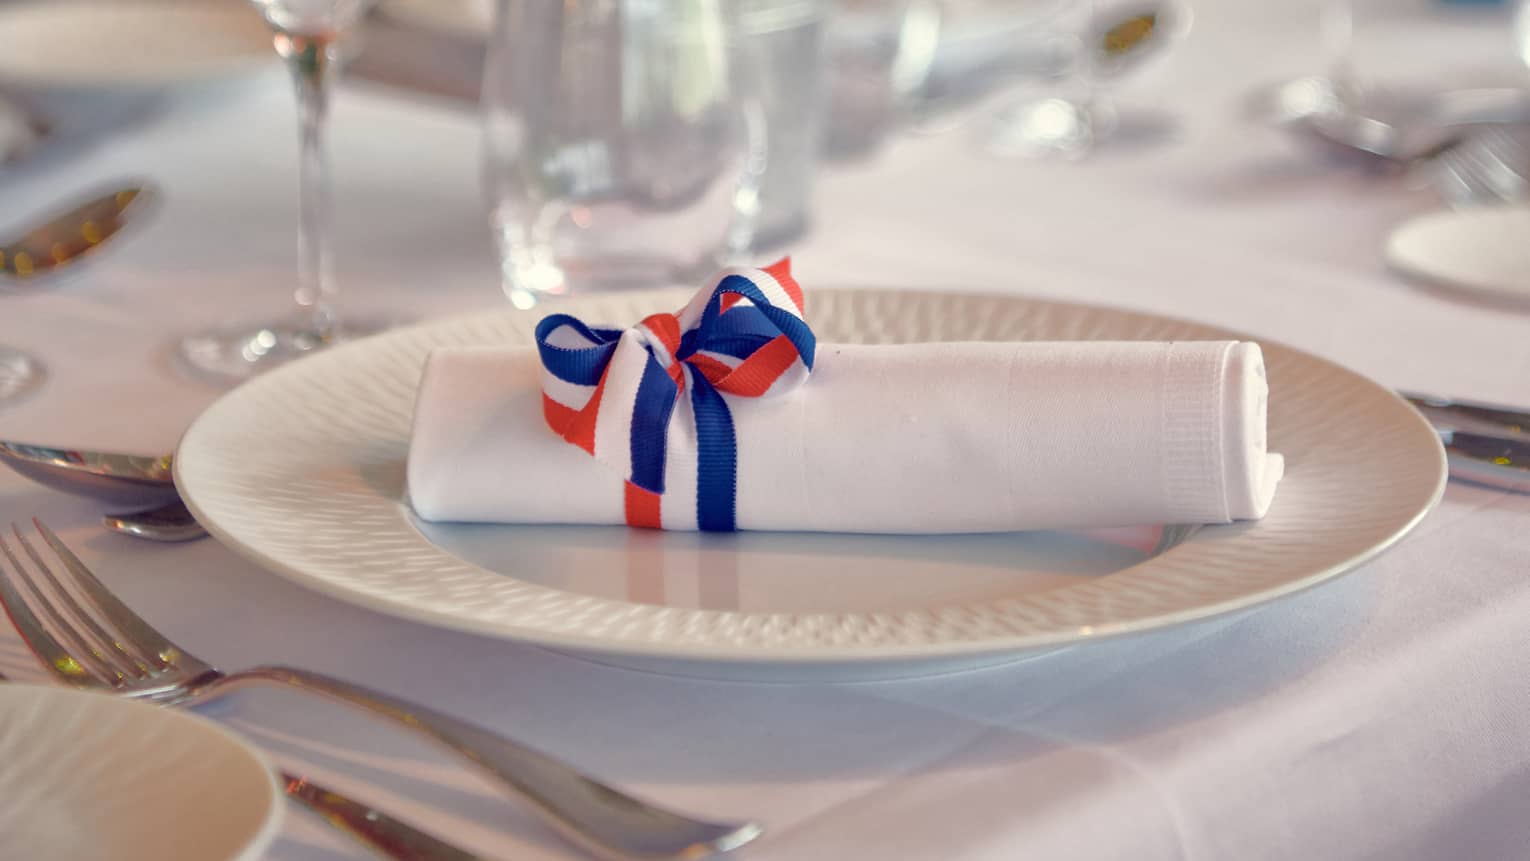 Table setting featuring the French flag